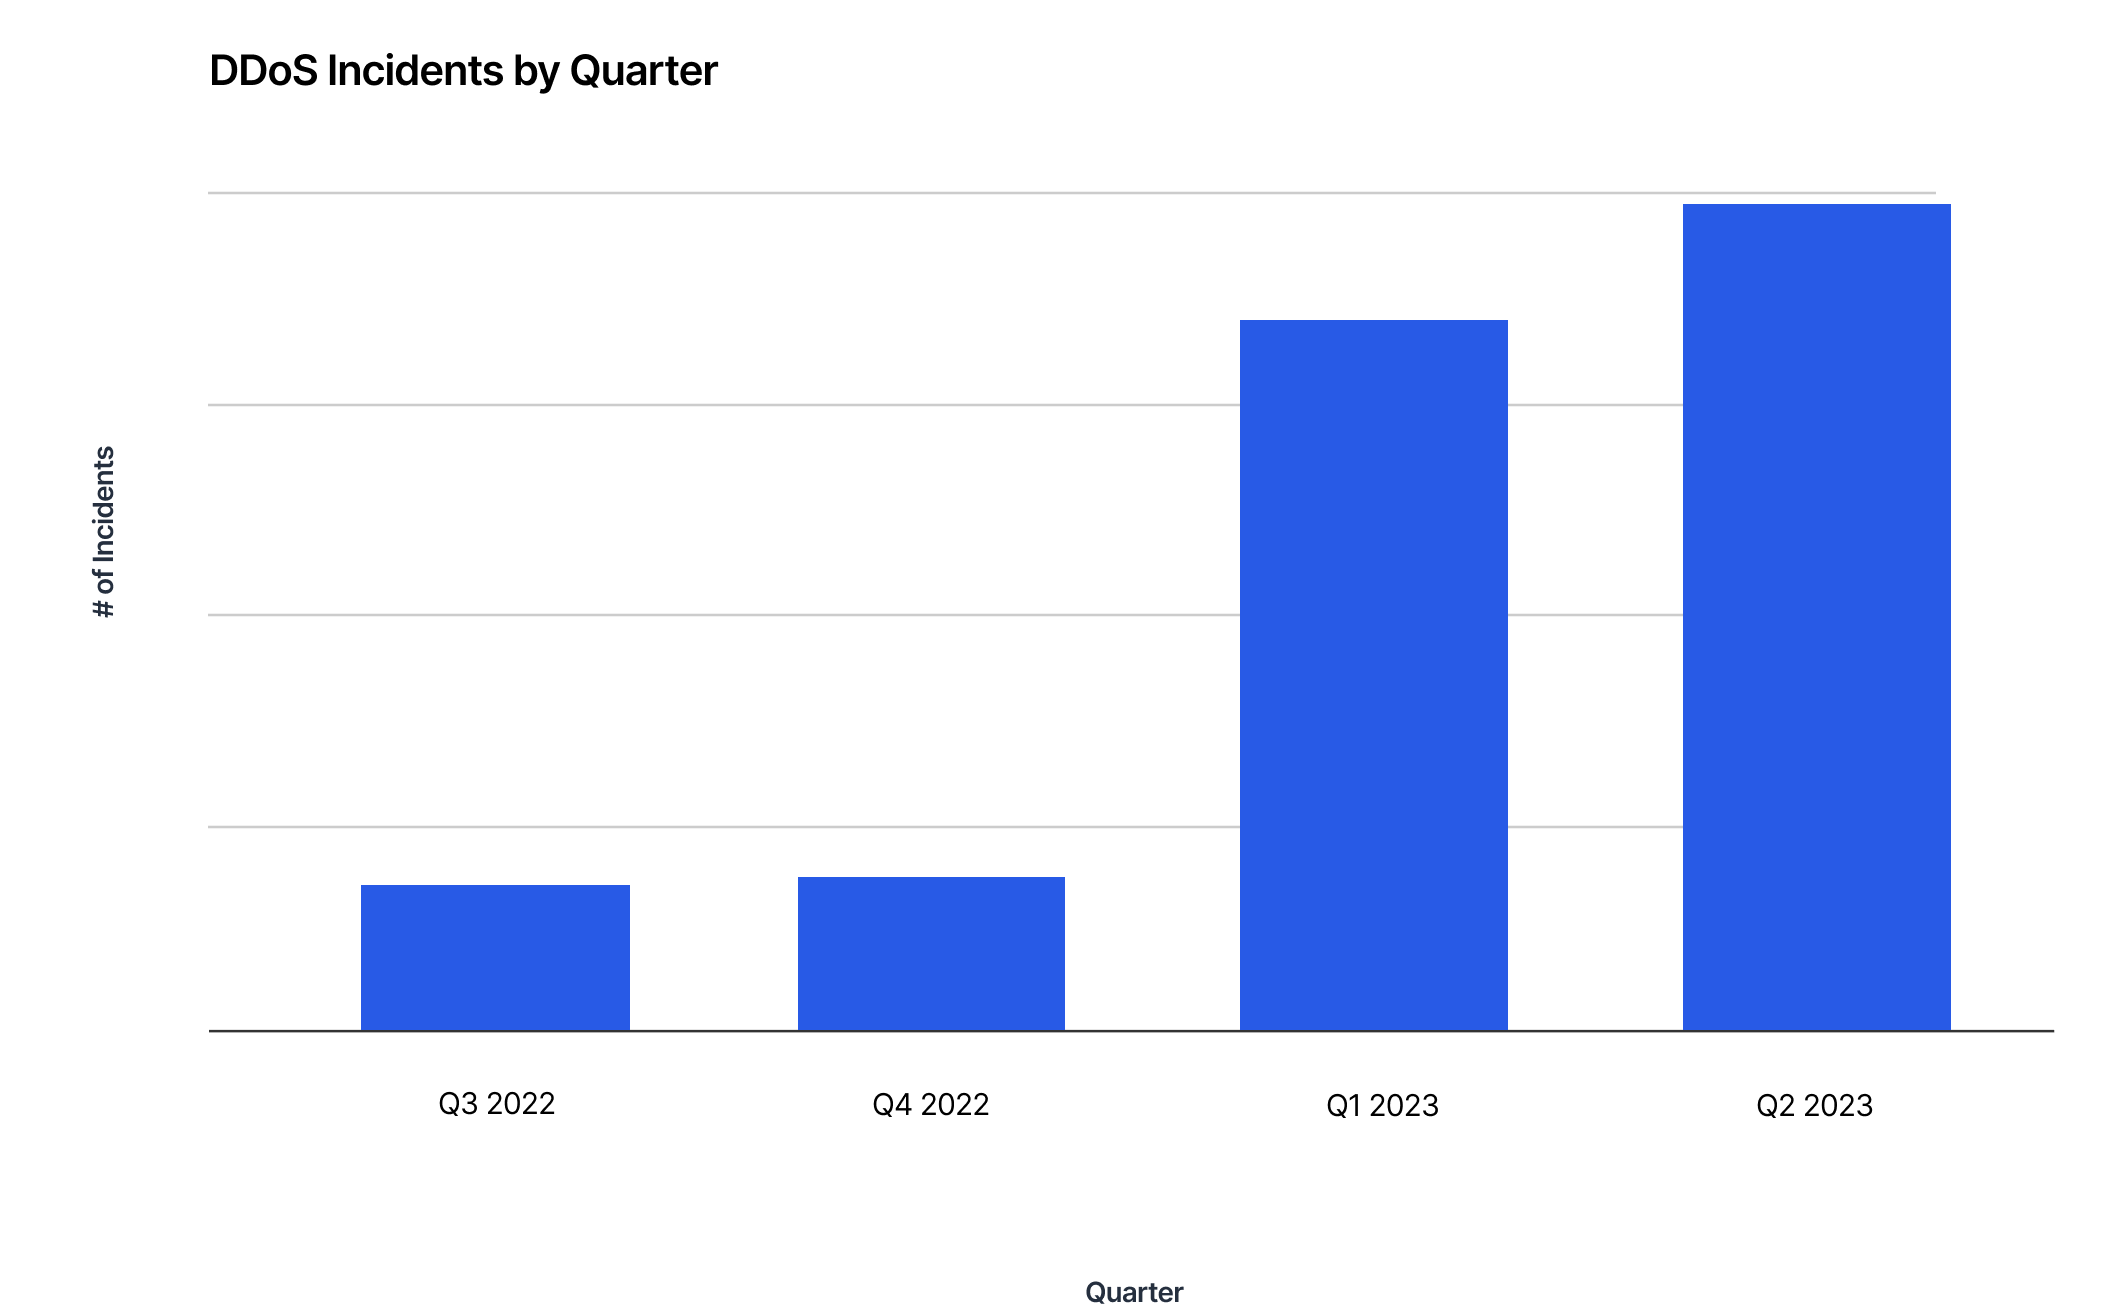 Graph showing DDoS incidents by quarter